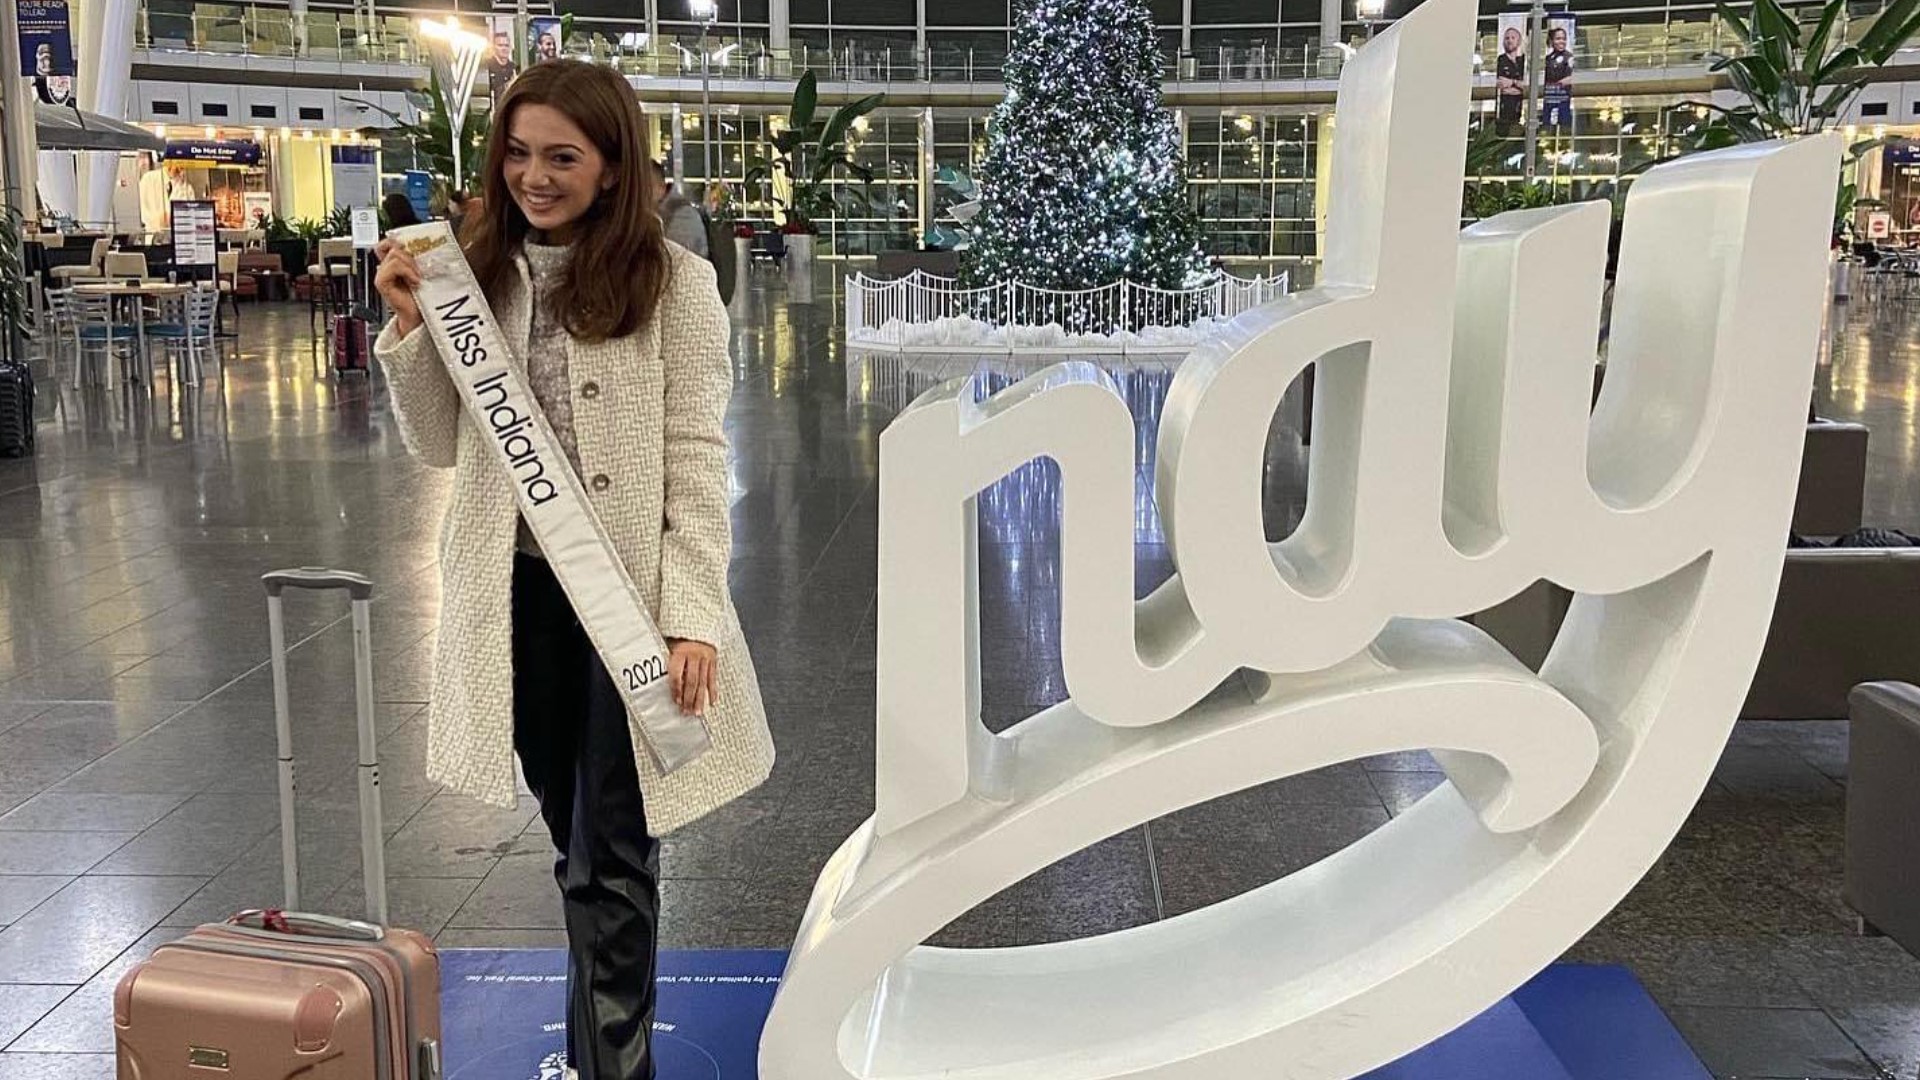 Preliminary competition for Miss America 2023 starts Monday, Dec. 12. Elizabeth Hallal says she is most looking forward to the talent portion of the competition.